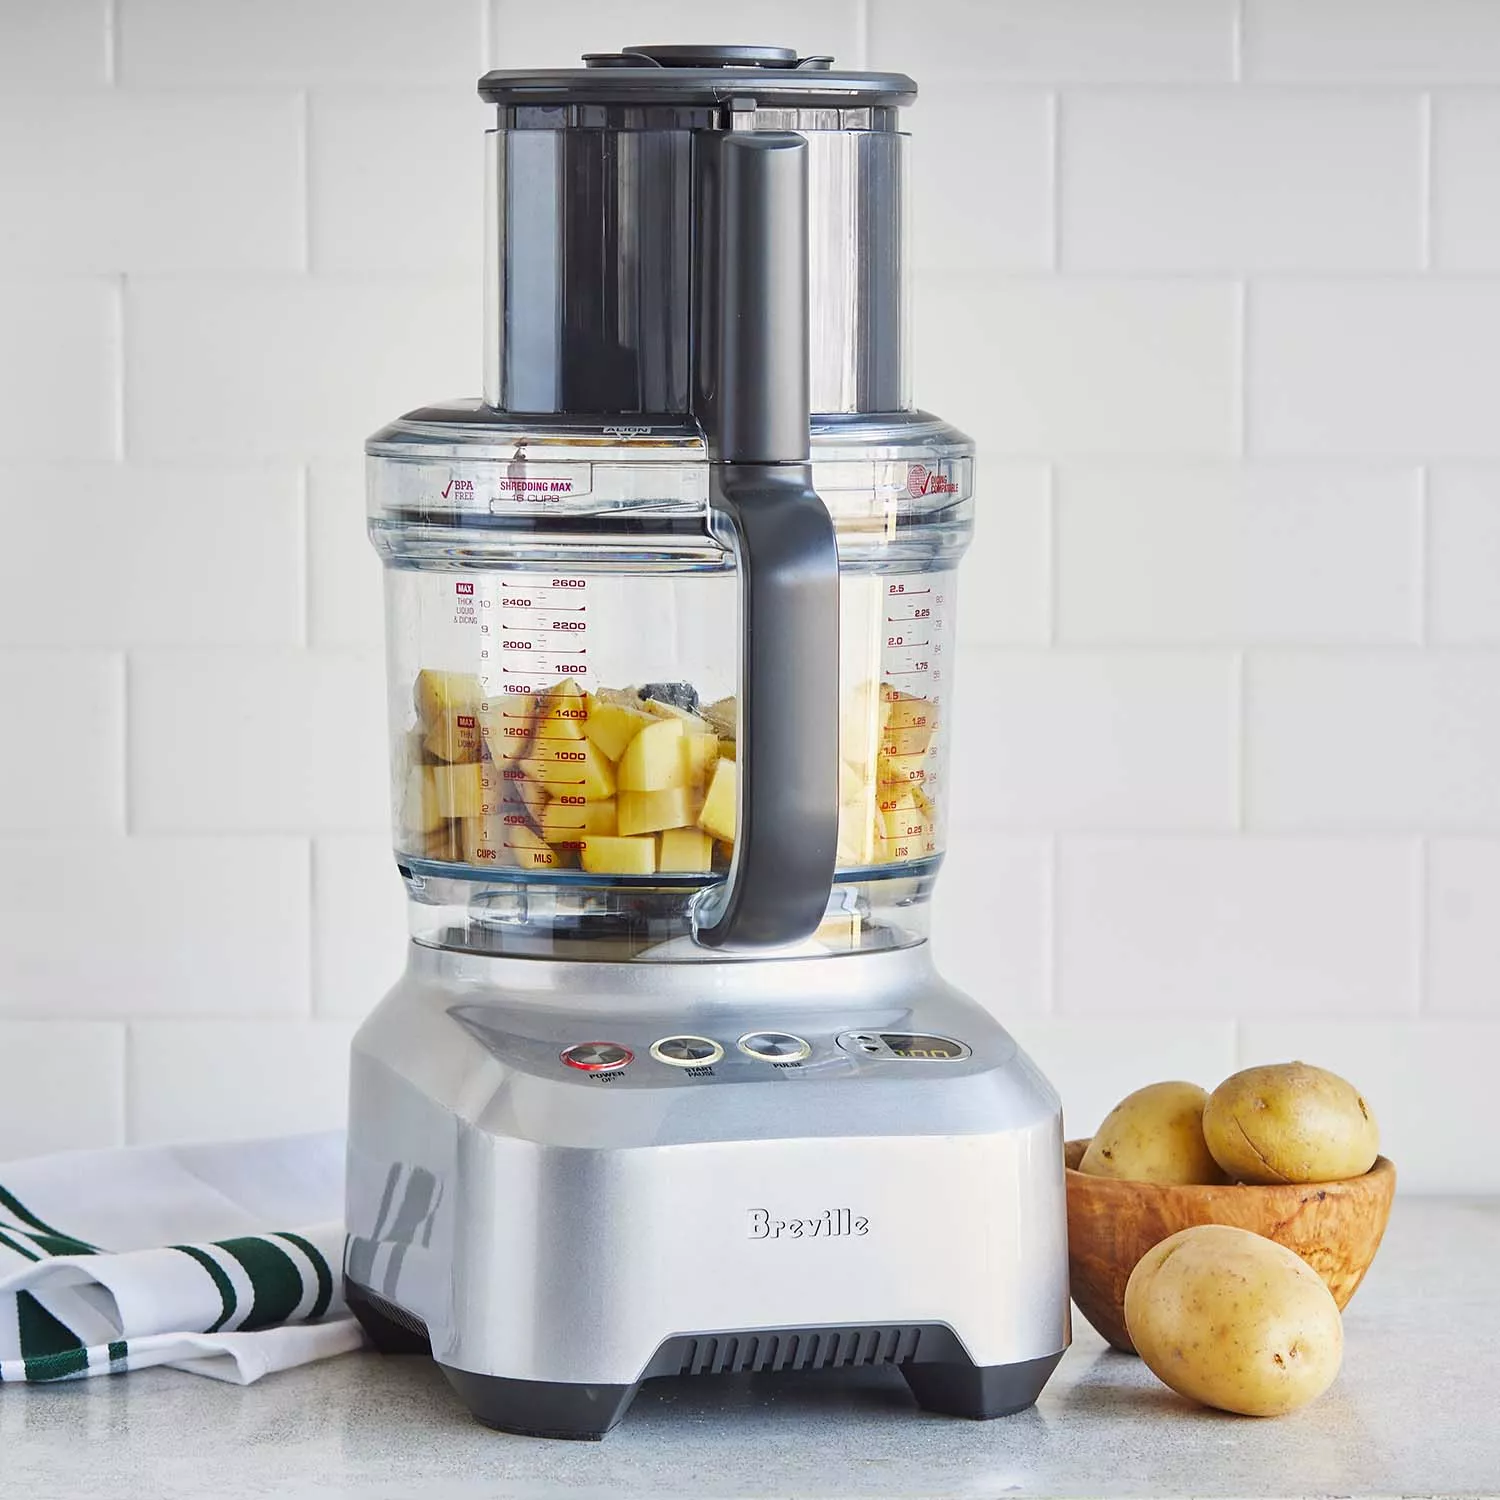 Breville Paradice Brushed Stainless Steel 16-Cup Food Processor + Reviews